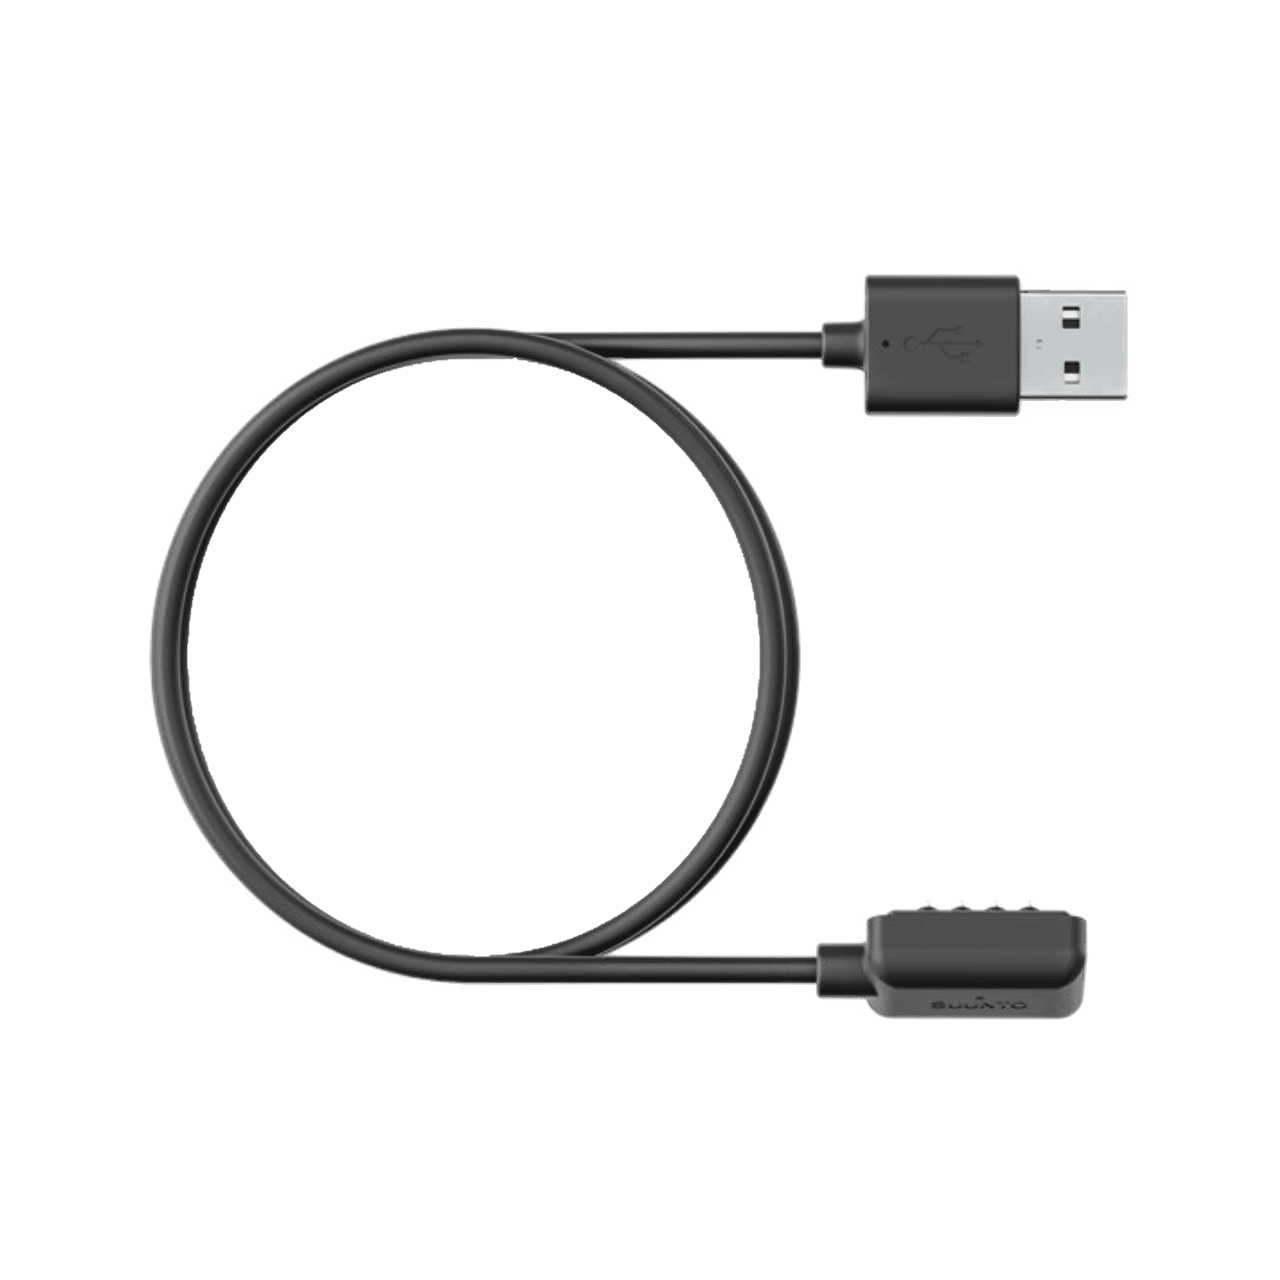 Suunto USB Magnetic Cable - The Sweat Shop